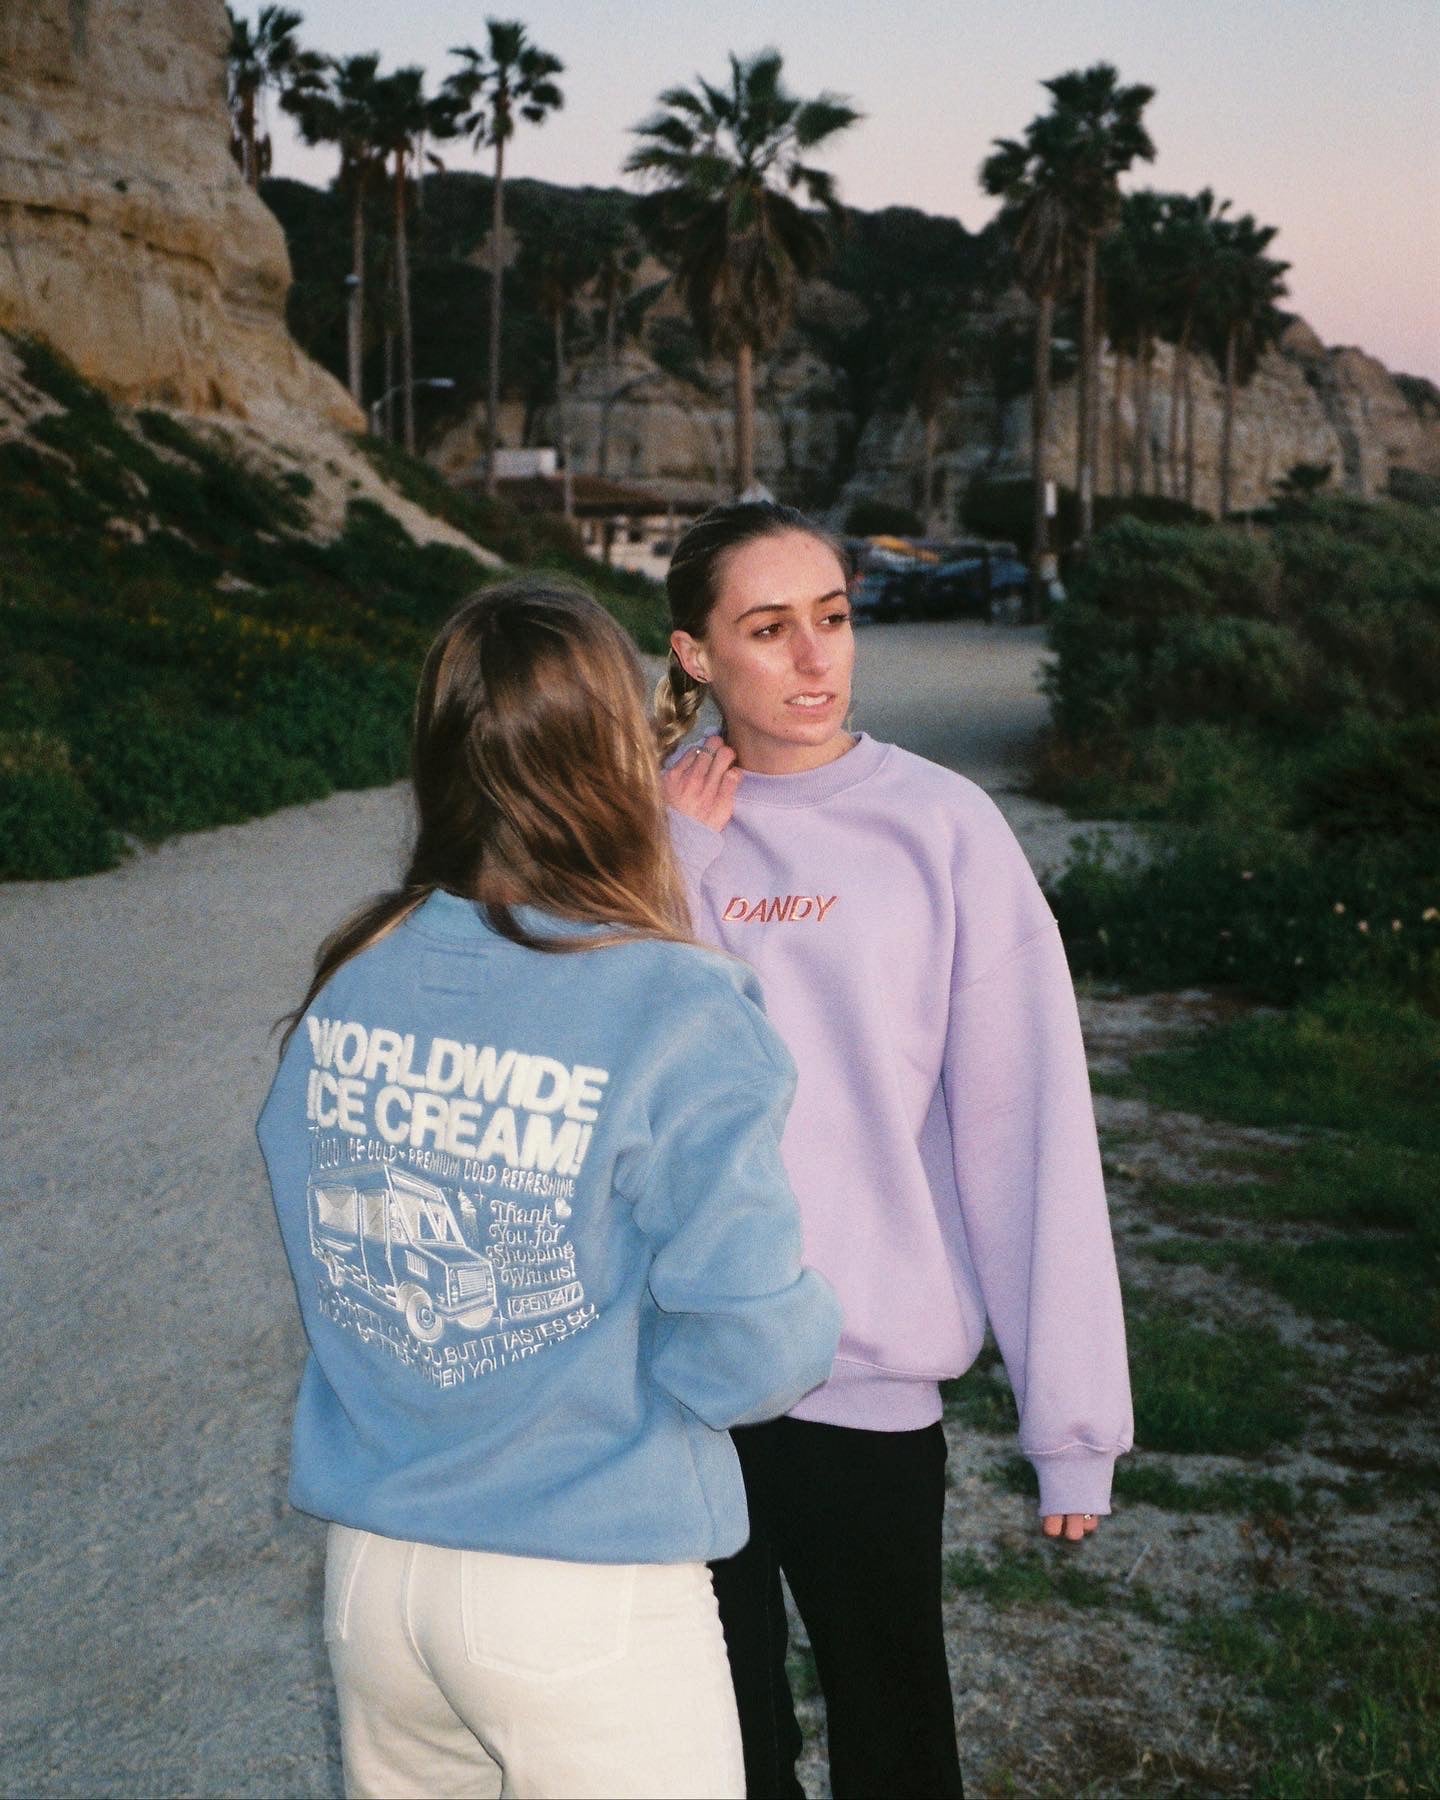 "Let's Watch the Sunset" Embroidered Crew Neck in Lavender